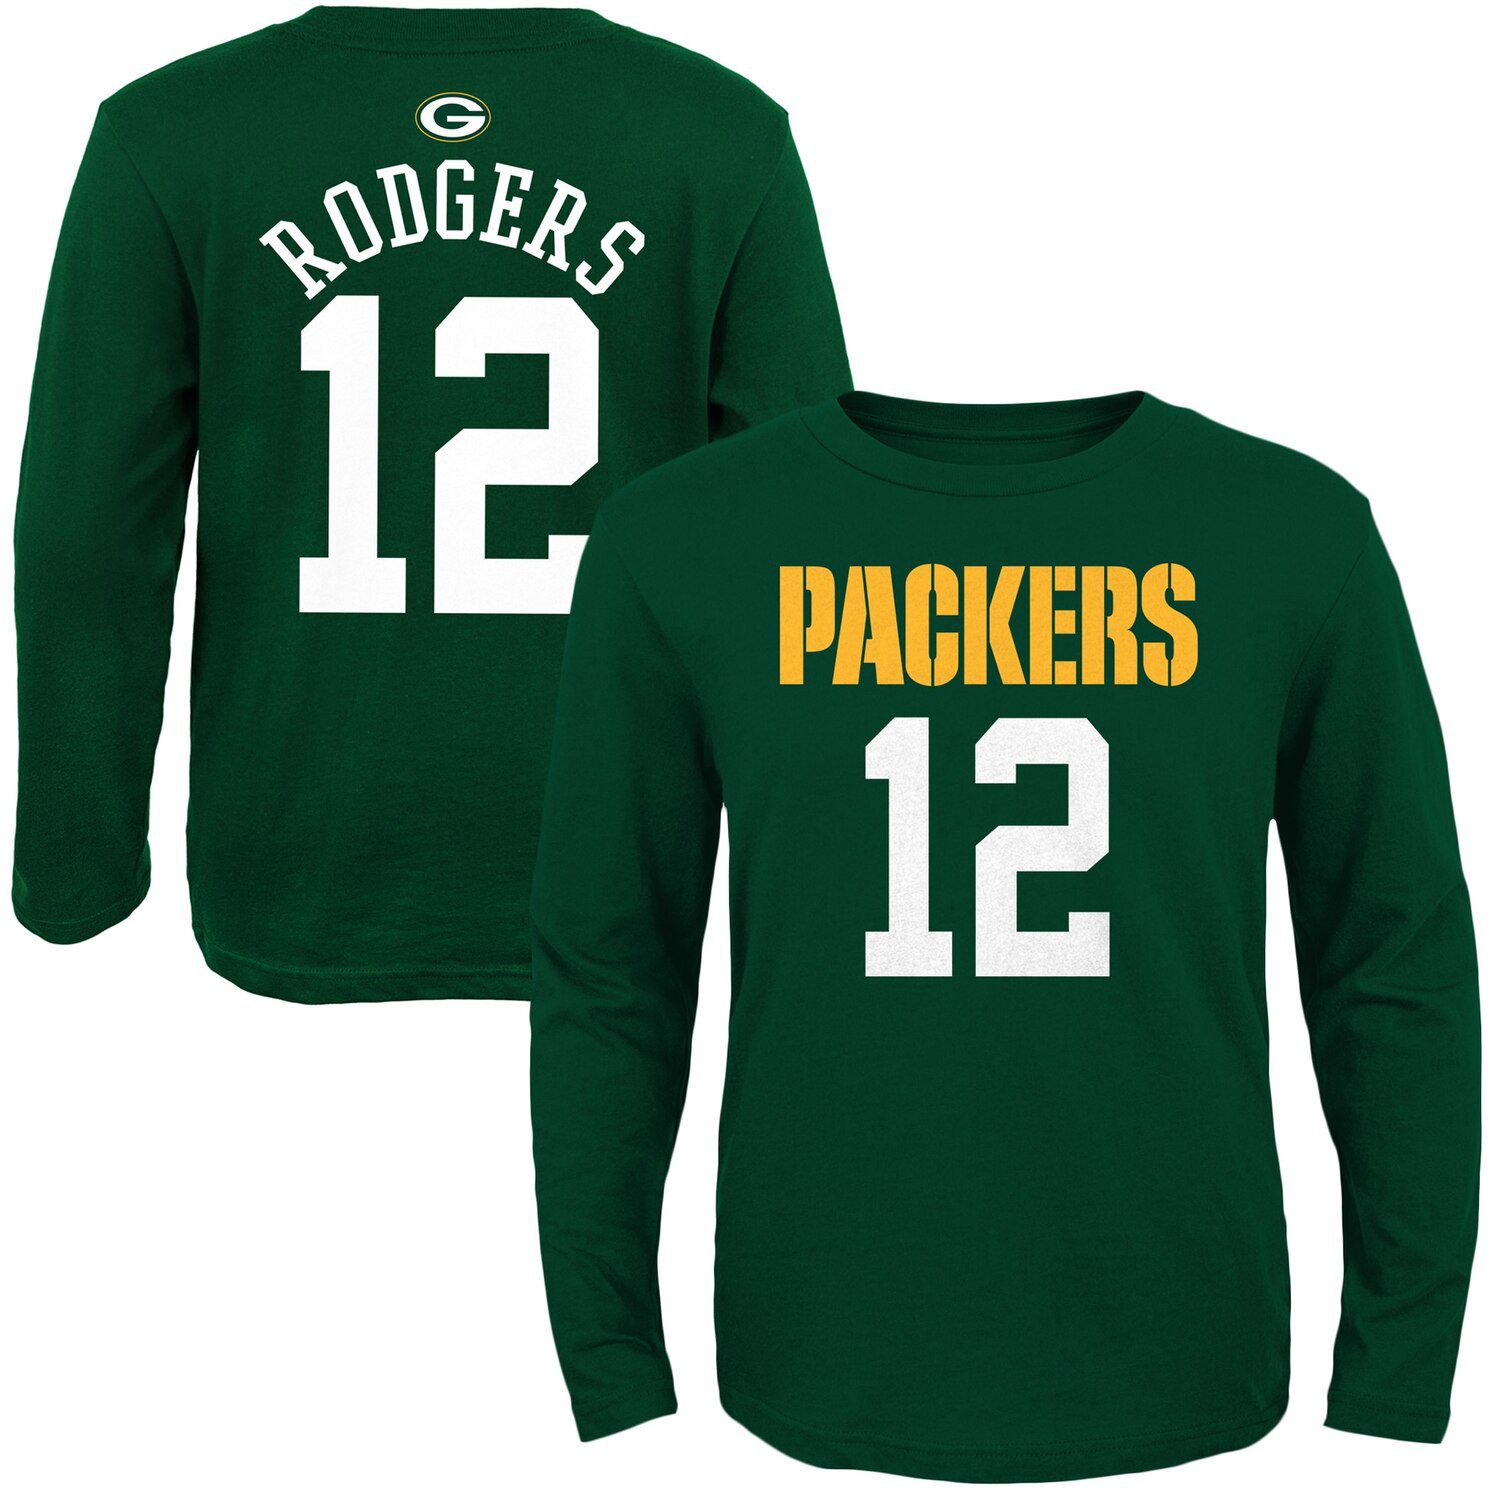 aaron rodgers youth jersey green